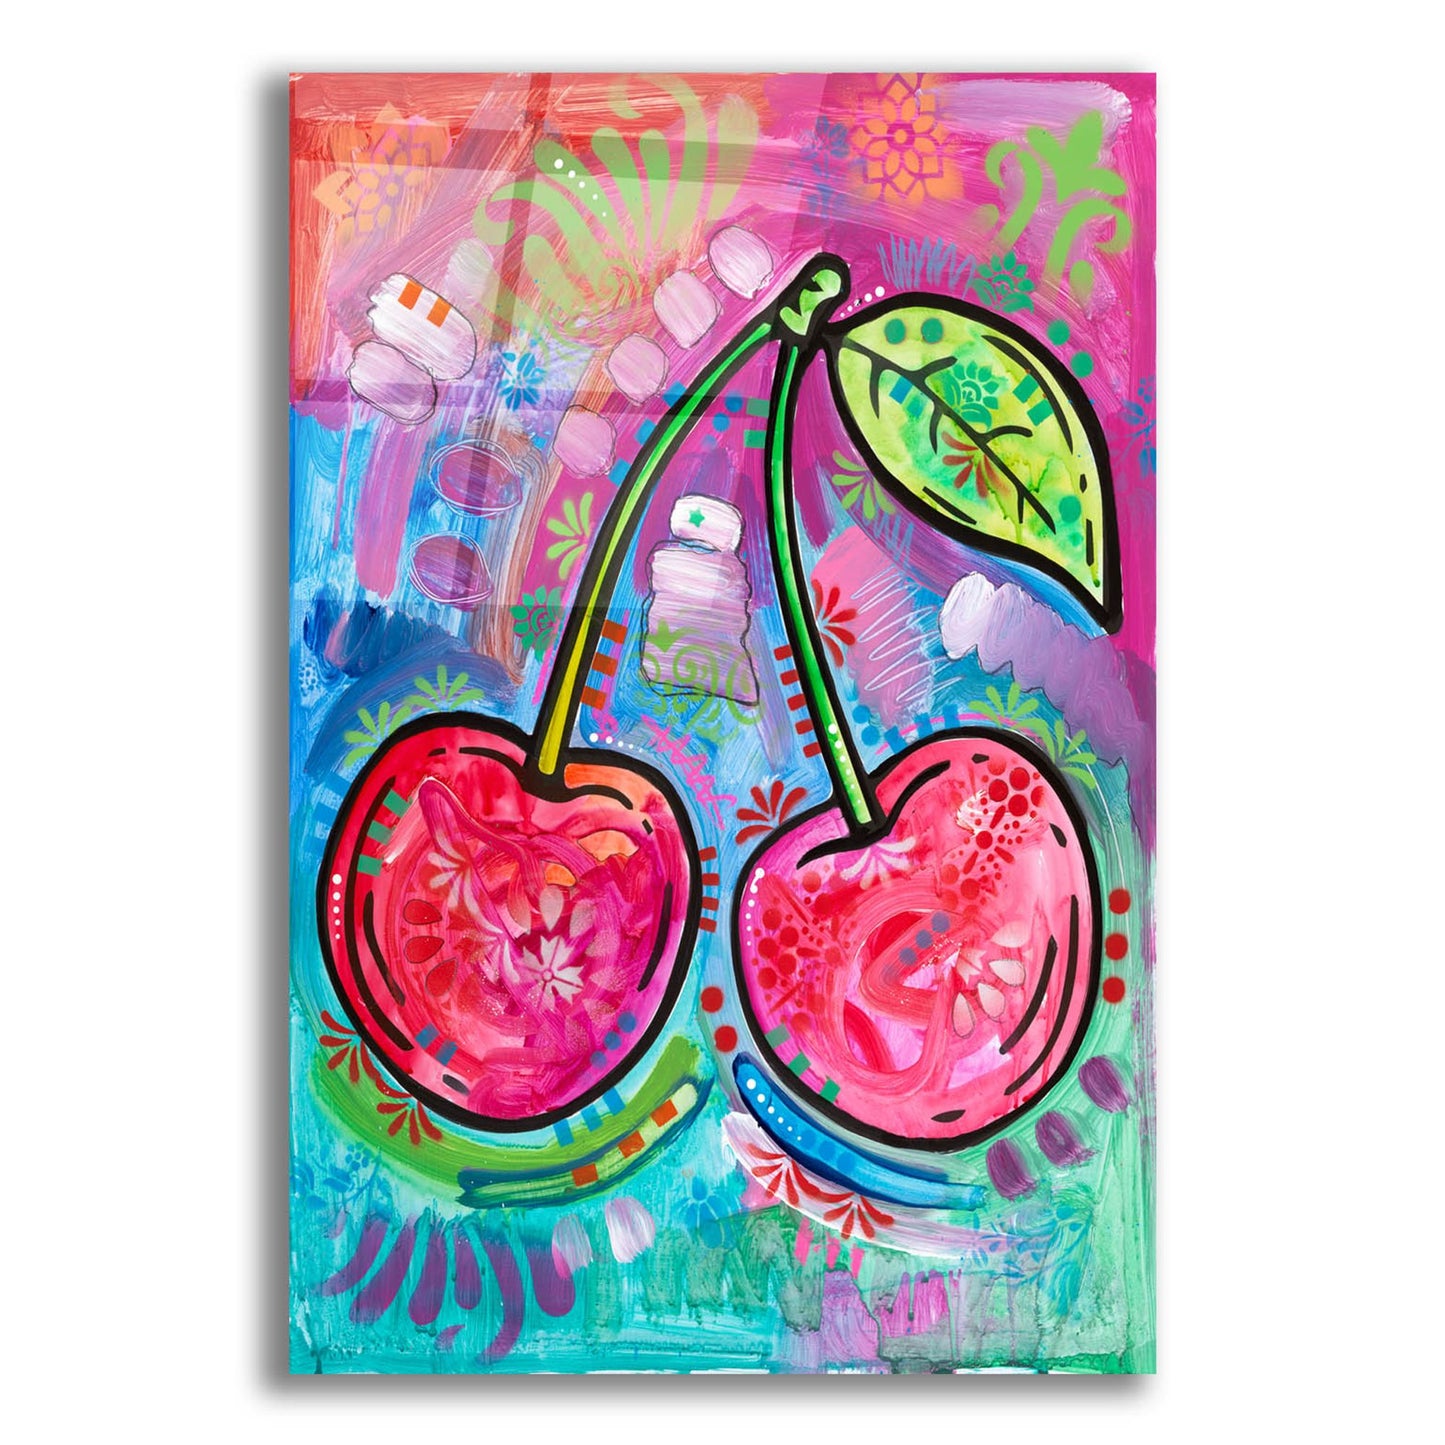 Epic Art 'Cherry Time' by Dean Russo, Acrylic Glass Wall Art